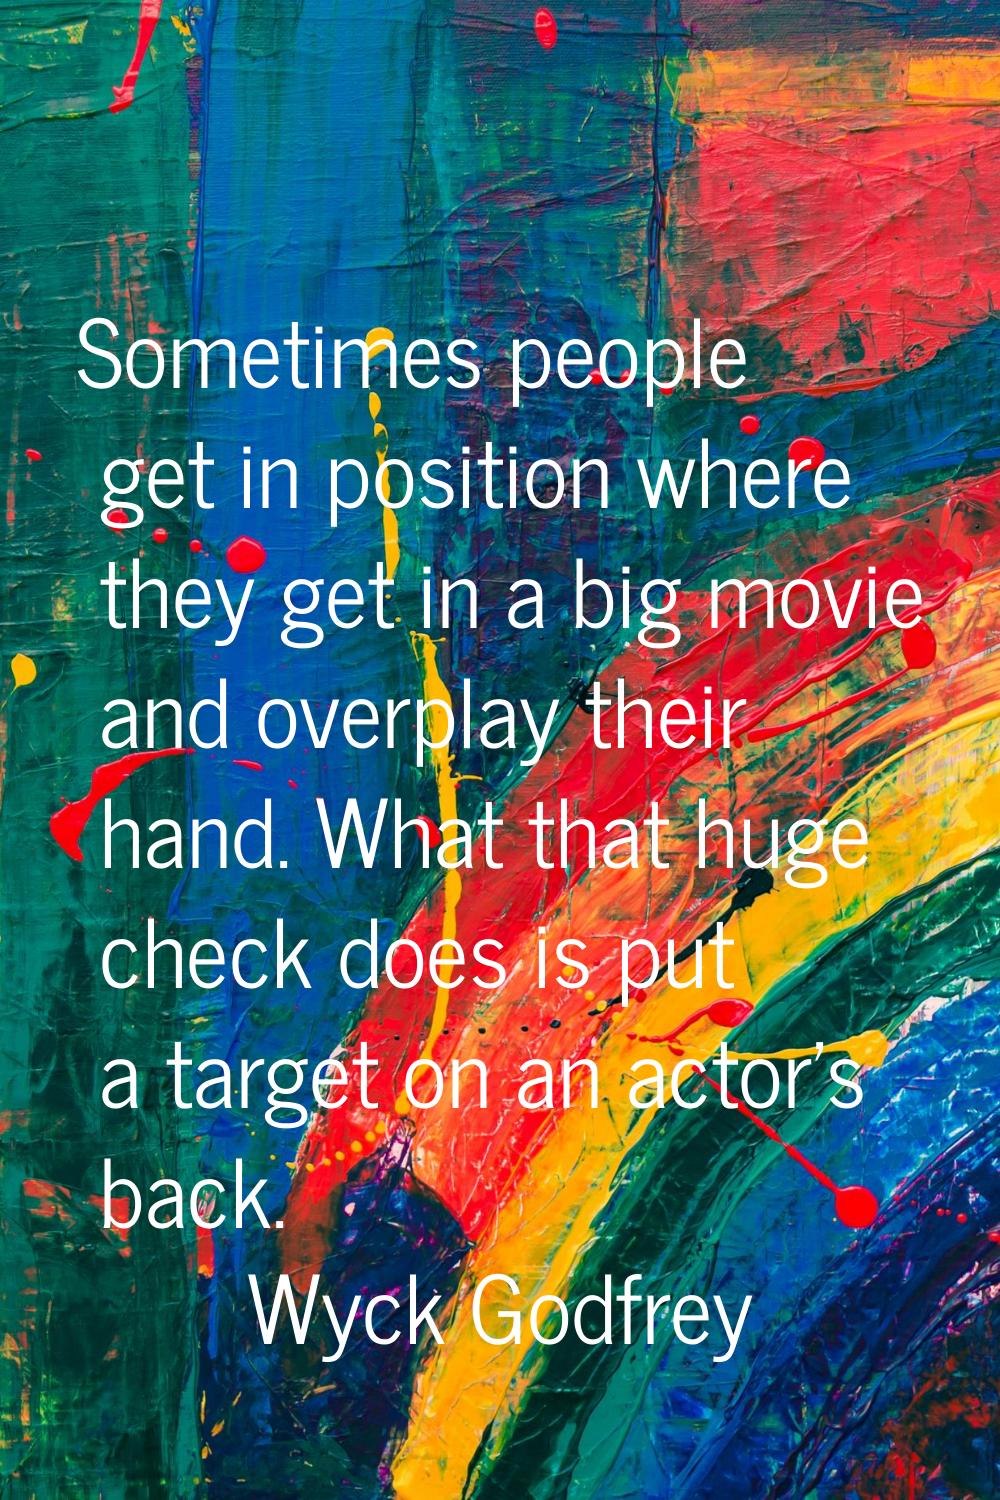 Sometimes people get in position where they get in a big movie and overplay their hand. What that h